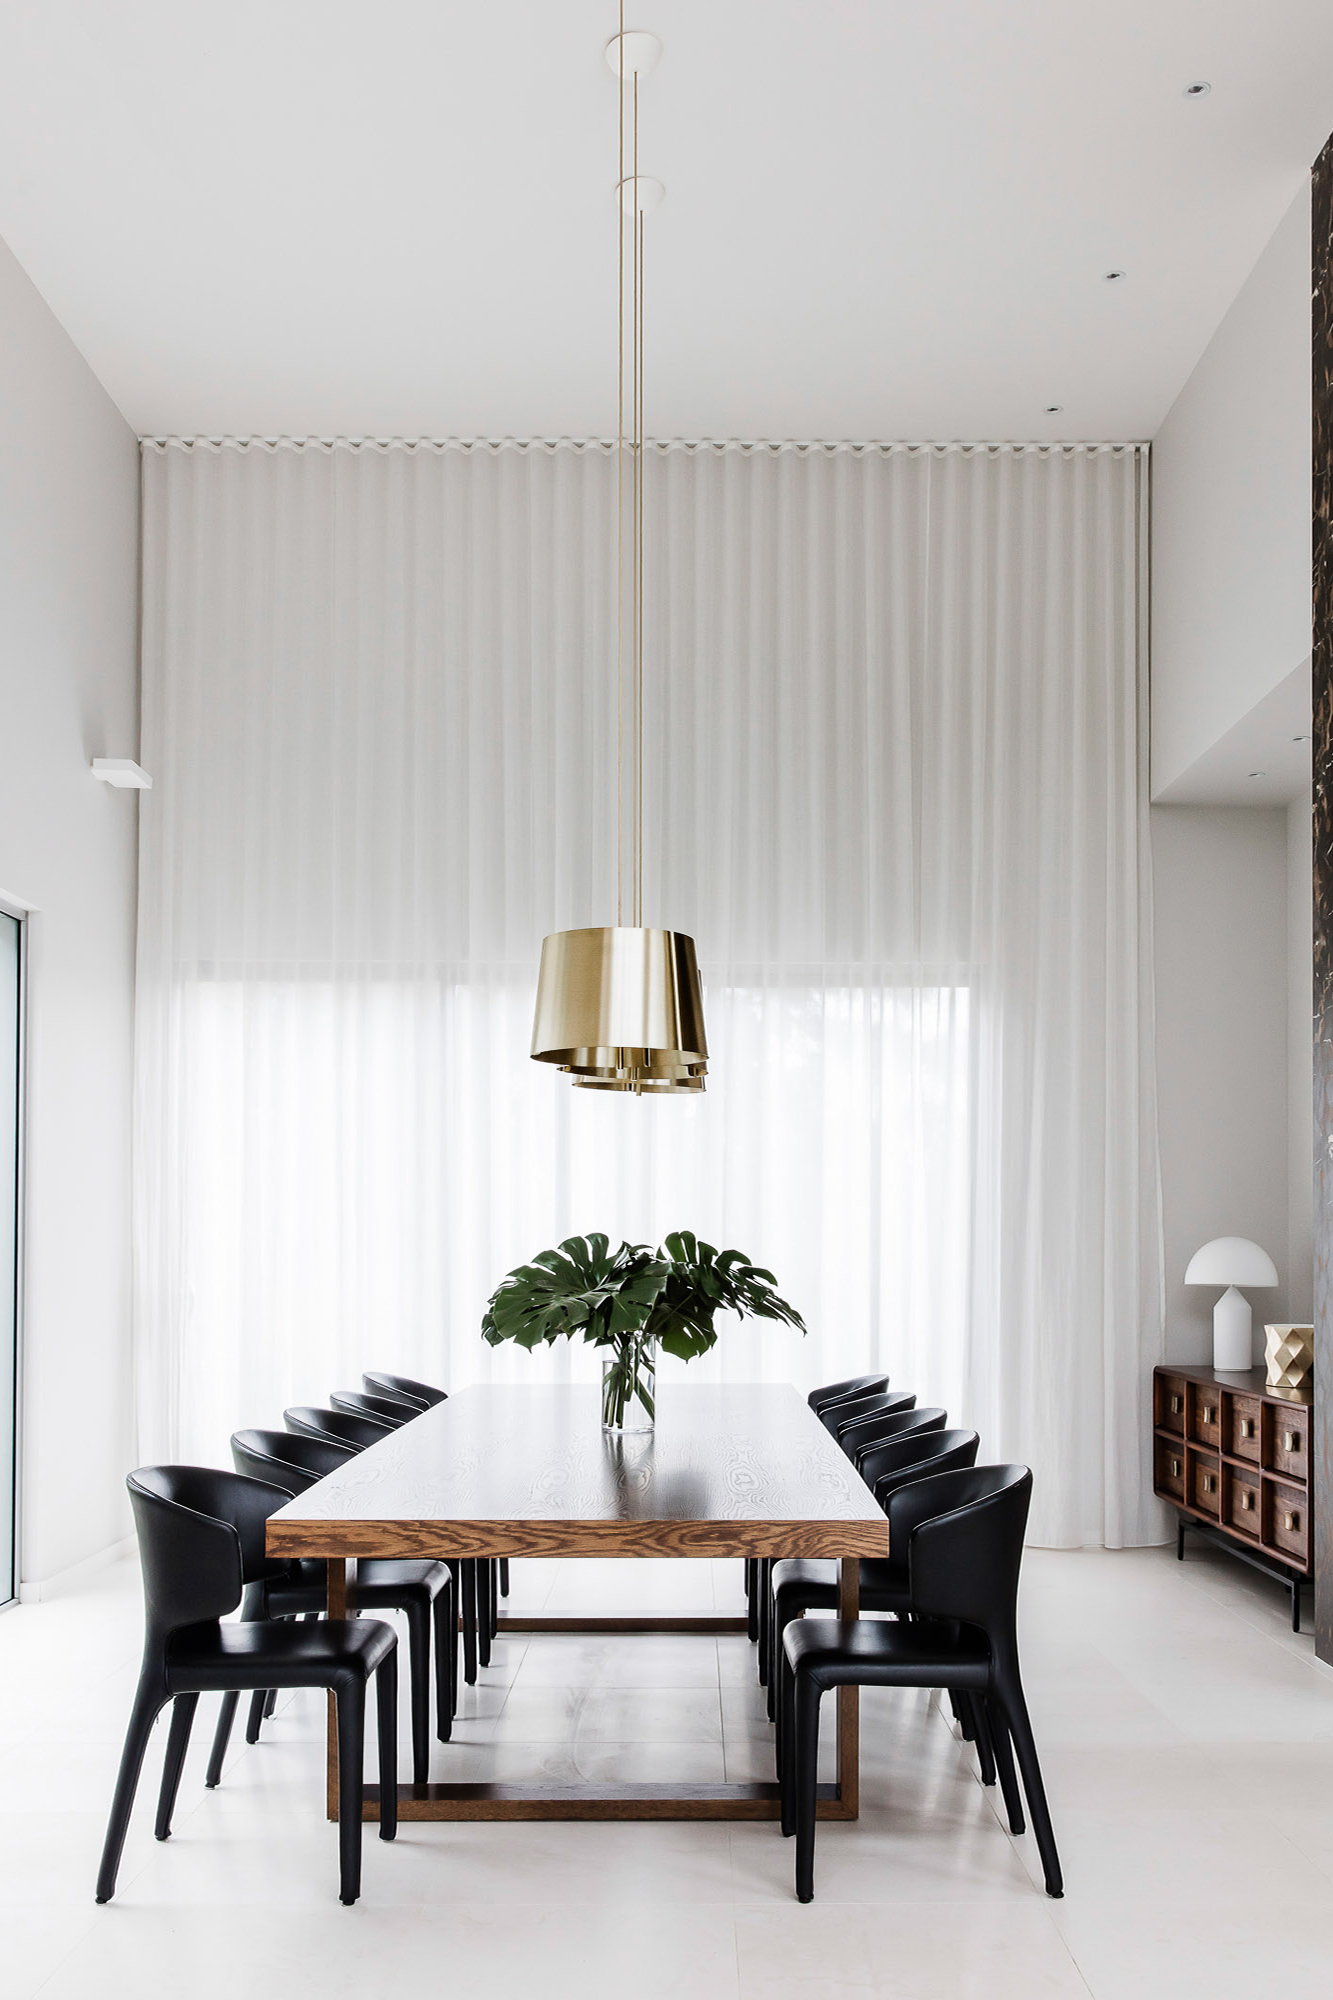 Dining room design with large timber dining table and black leather chairs by Sydney interior designers, Brendan Wong Design